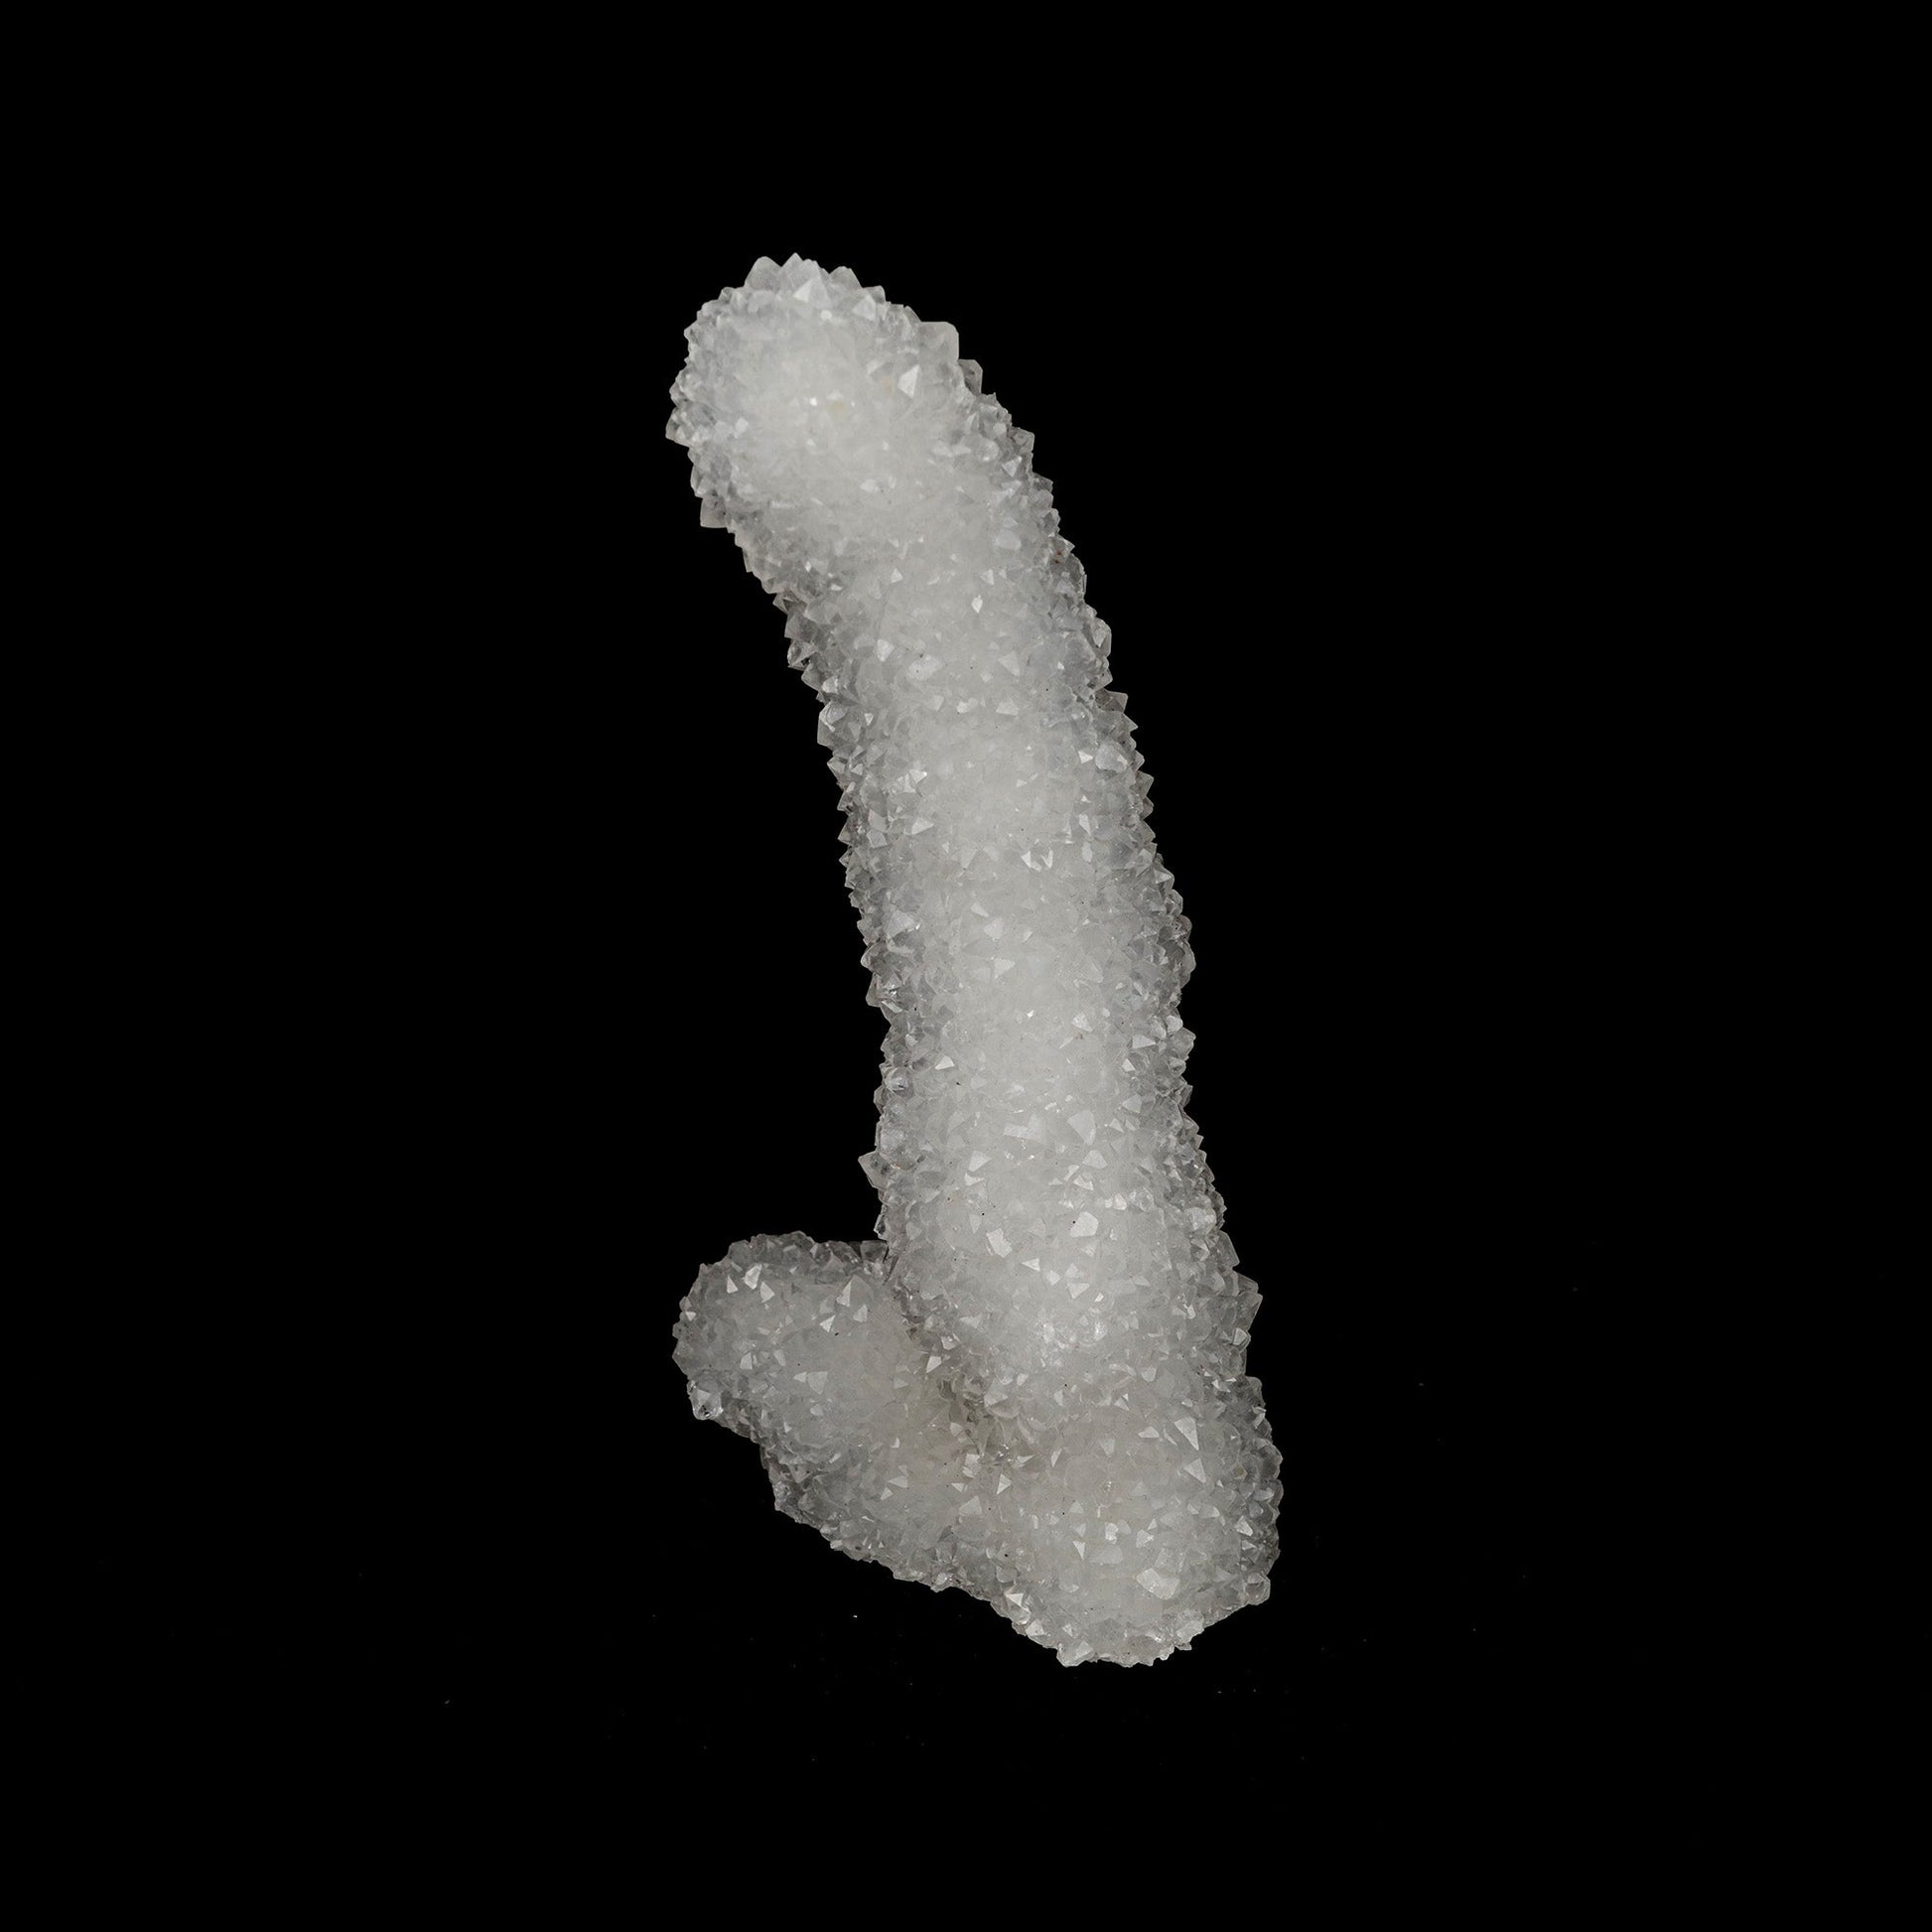 MM Quartz Stalactite Natural Mineral Specimen # B 5271  https://www.superbminerals.us/products/mm-quartz-stalactite-natural-mineral-specimen-b-5271  Features: Natural manufactured MM Quartz Stalactite from Nashik, India.This sculpture is self-standing and will look amazing in any collection, exhibition, or alter. Primary Mineral(s): MM Quartz Secondary Mineral(s): N/AMatrix: N/A 6 Inch x 3 InchWeight : 302 GmsLocality: Nashik, Maharashtra, India